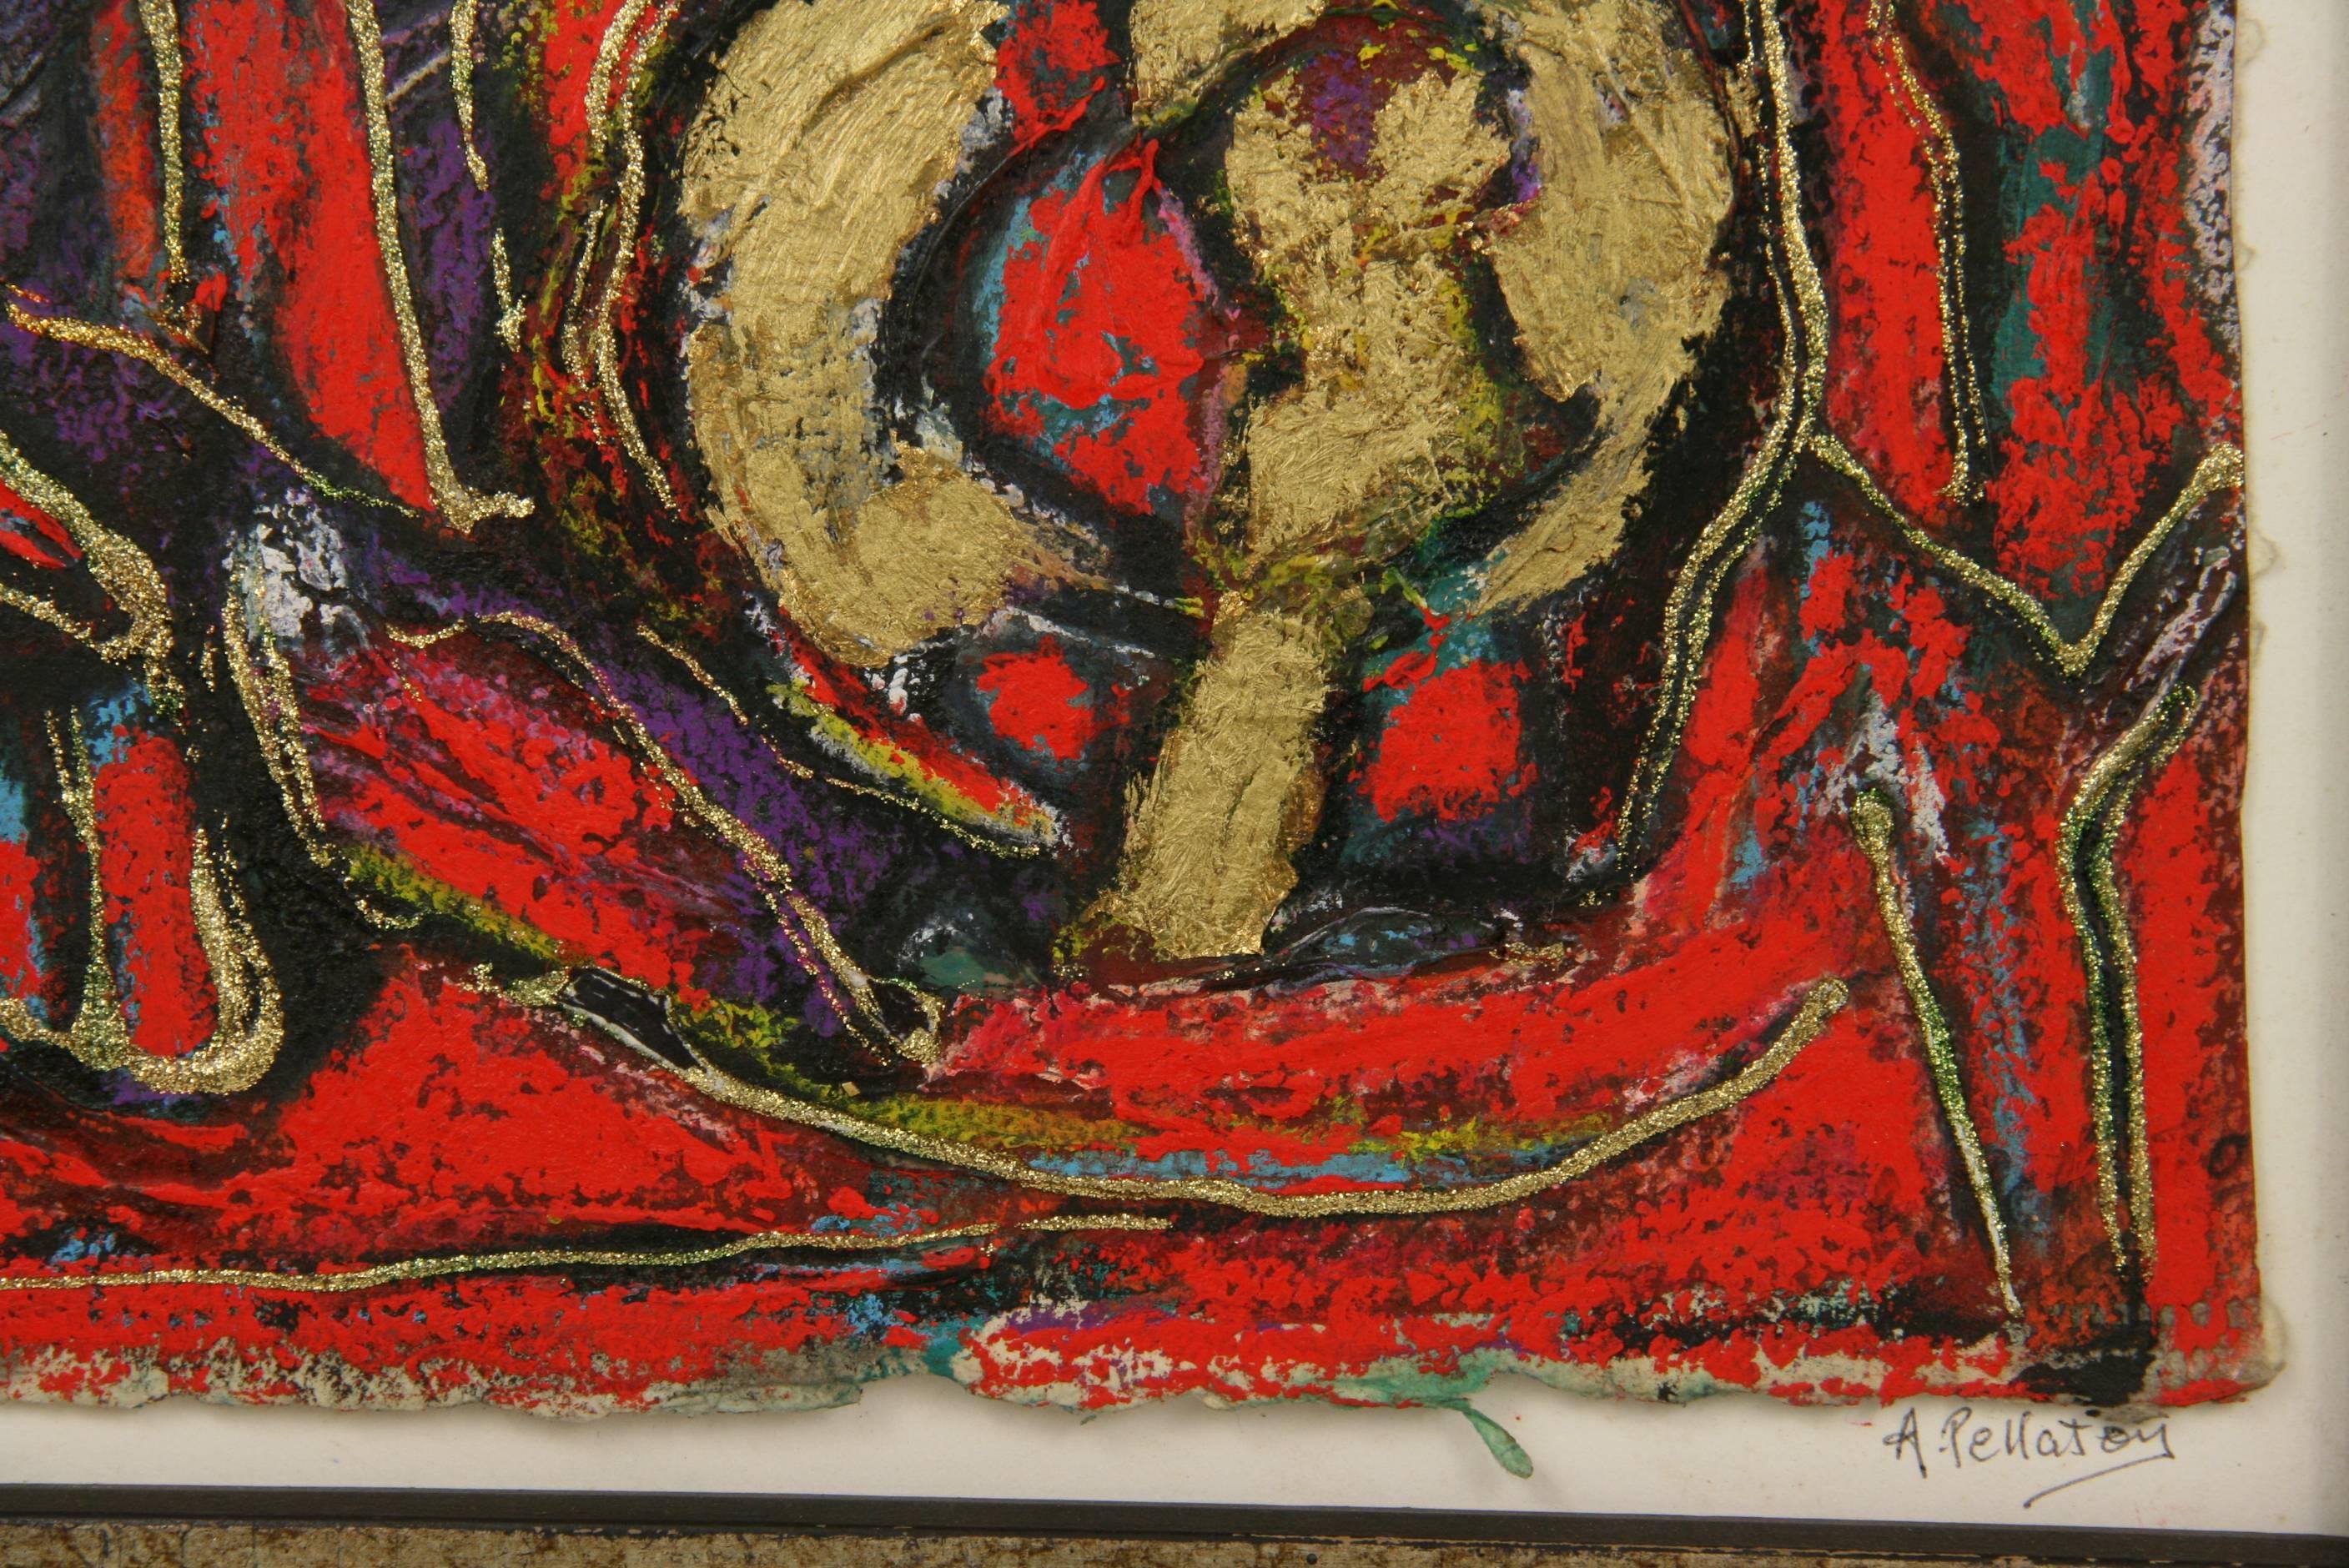  Red Abstract Mixed Media Painting 2